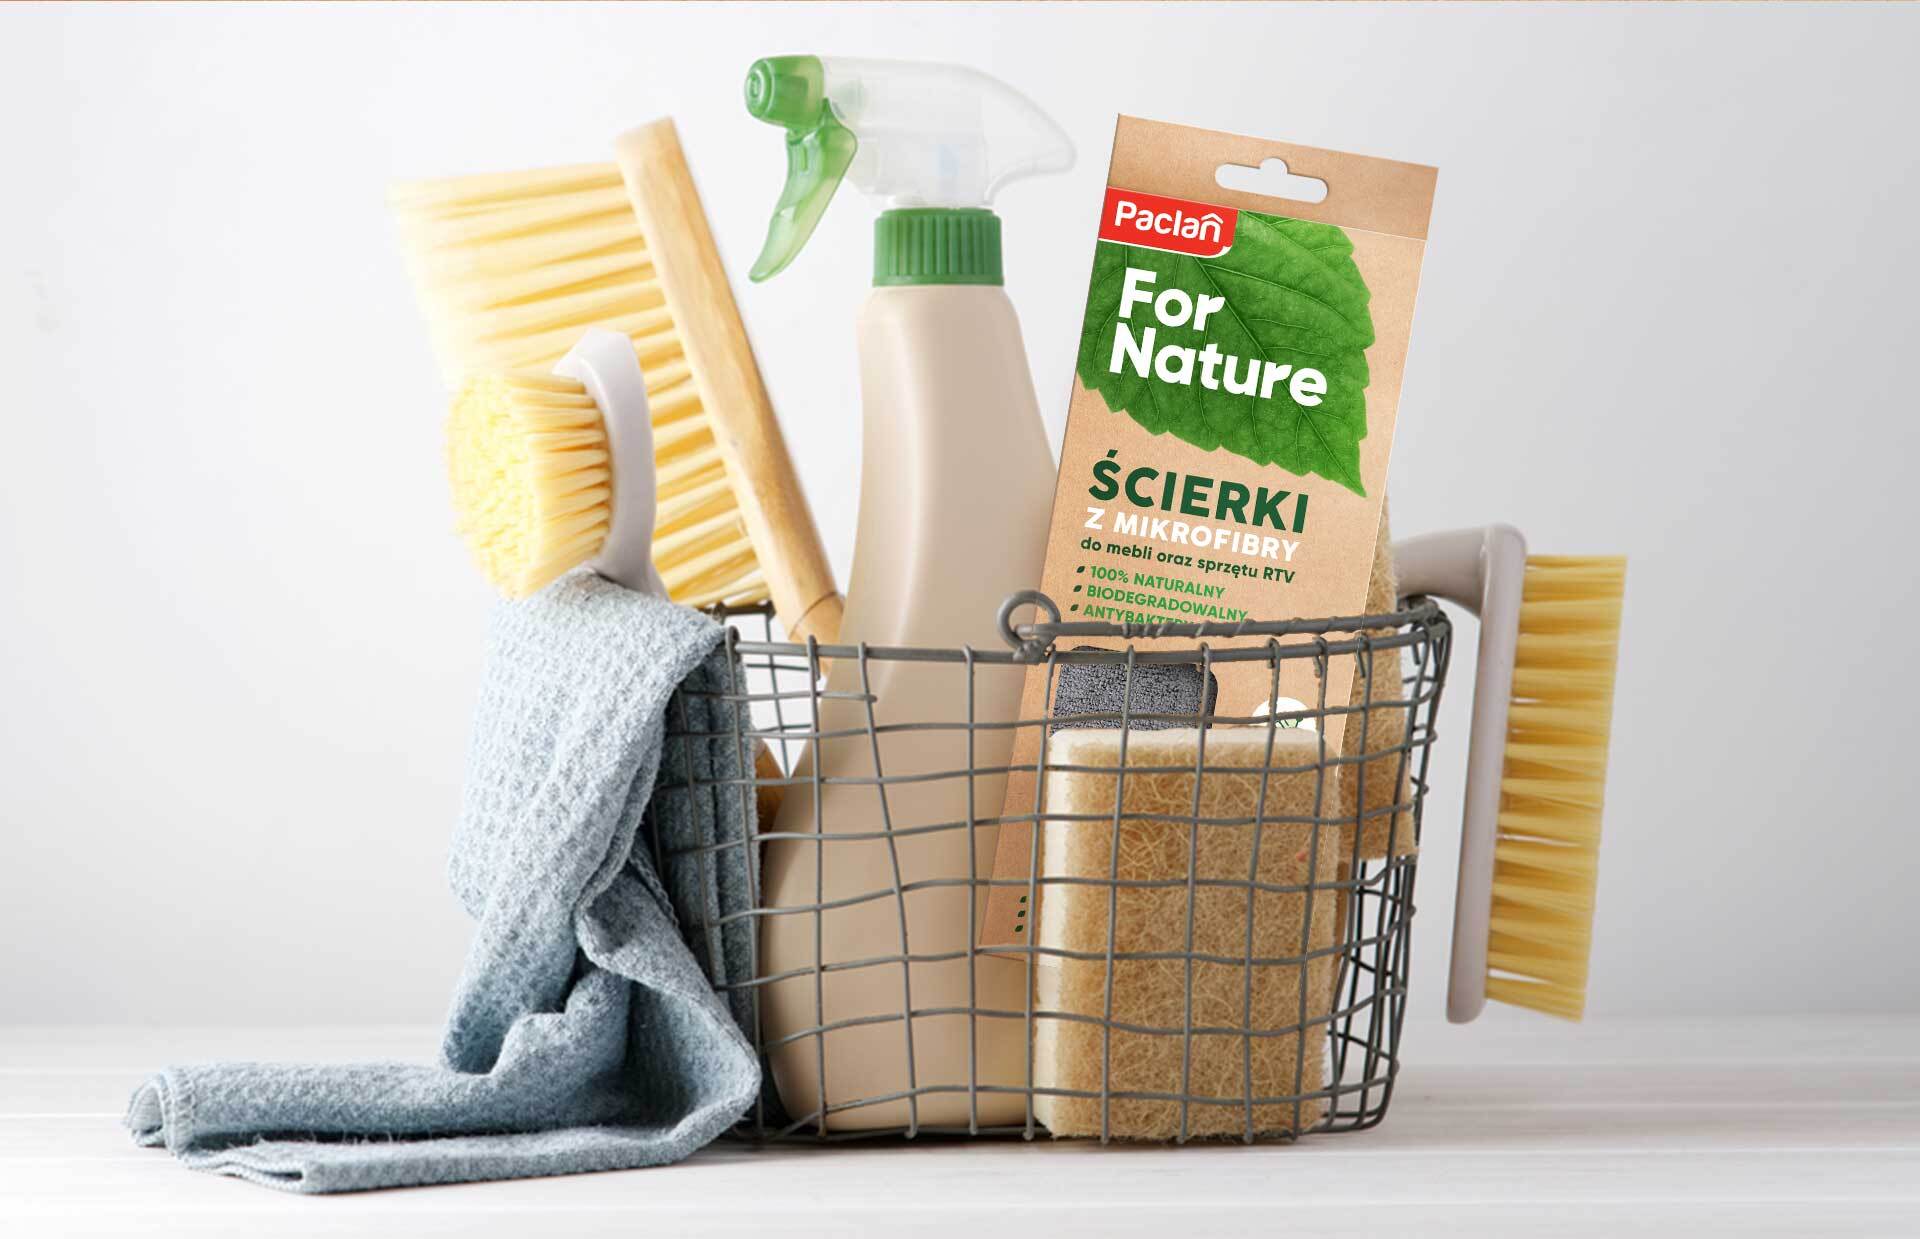 Basket with household cleaning products and ecological design of Paclan For Nature packaging.